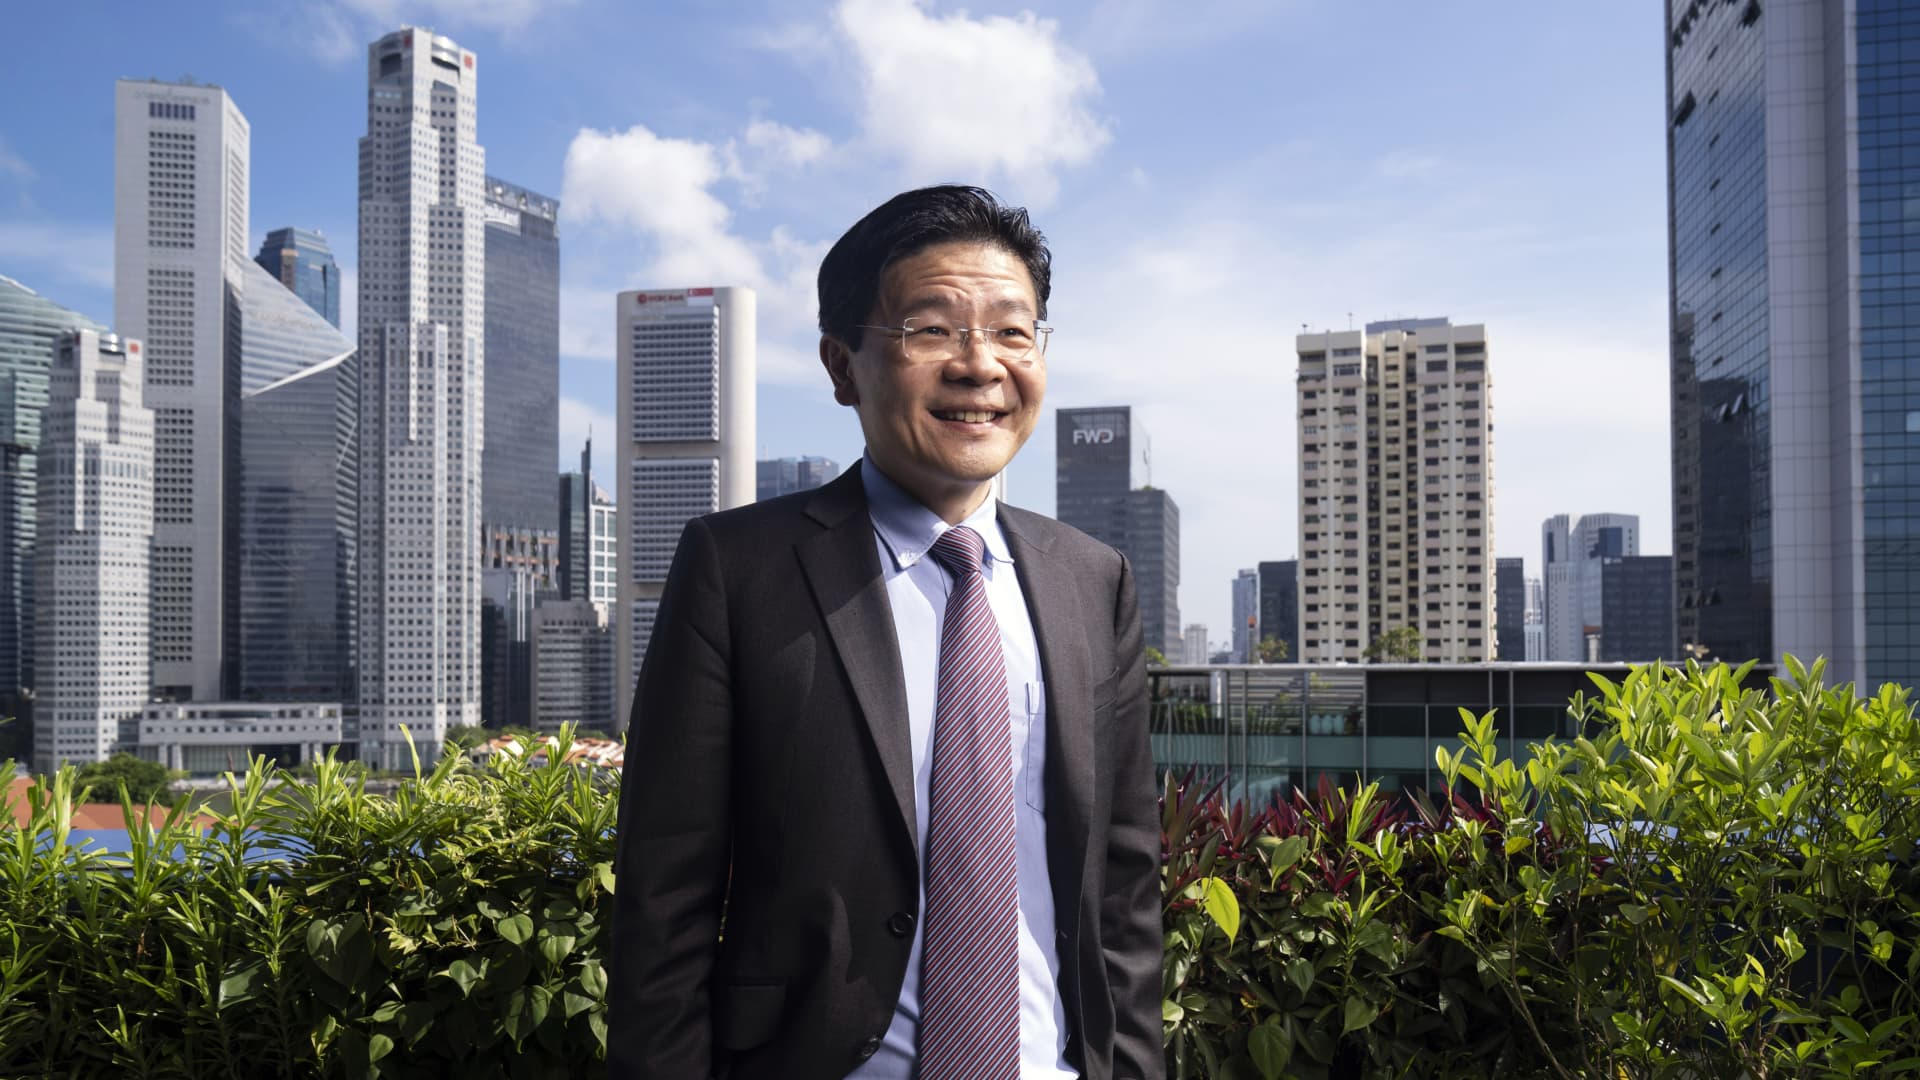 The golden age of globalization has ended: Singapore’s Lawrence Wong